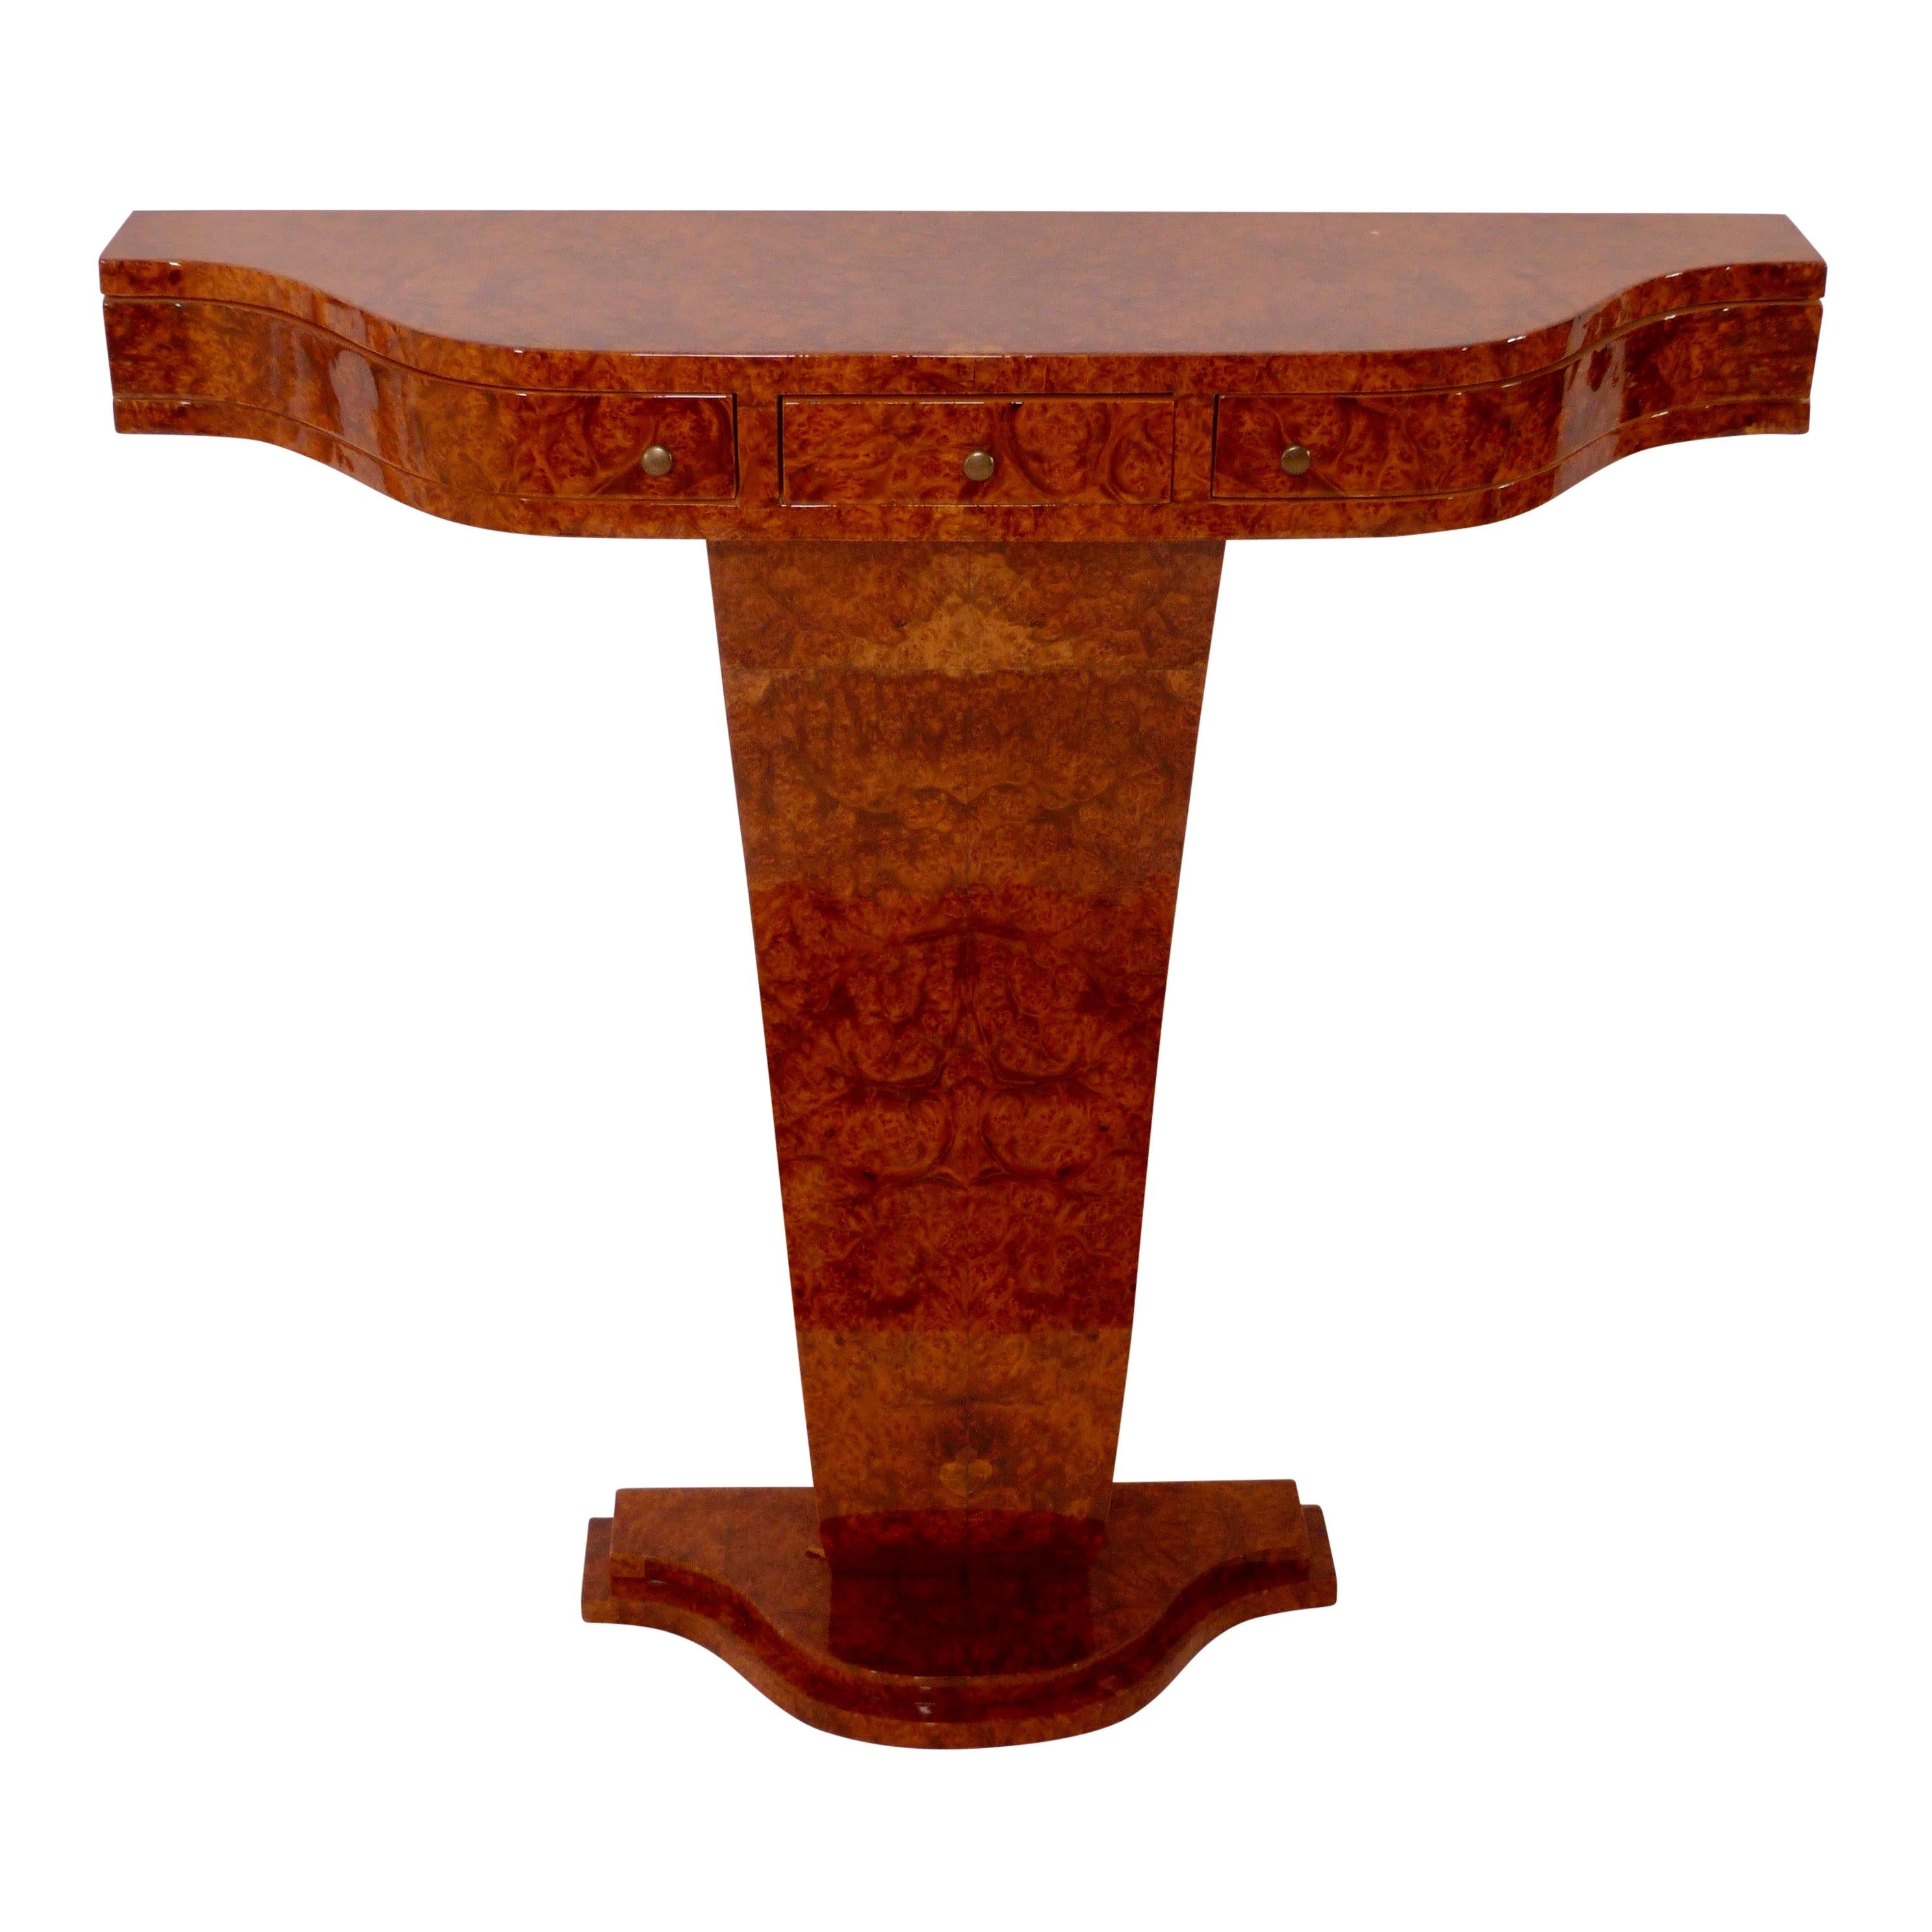 Art Deco Style Little Waved Console Table with Drawers in Amboina Burl Wood